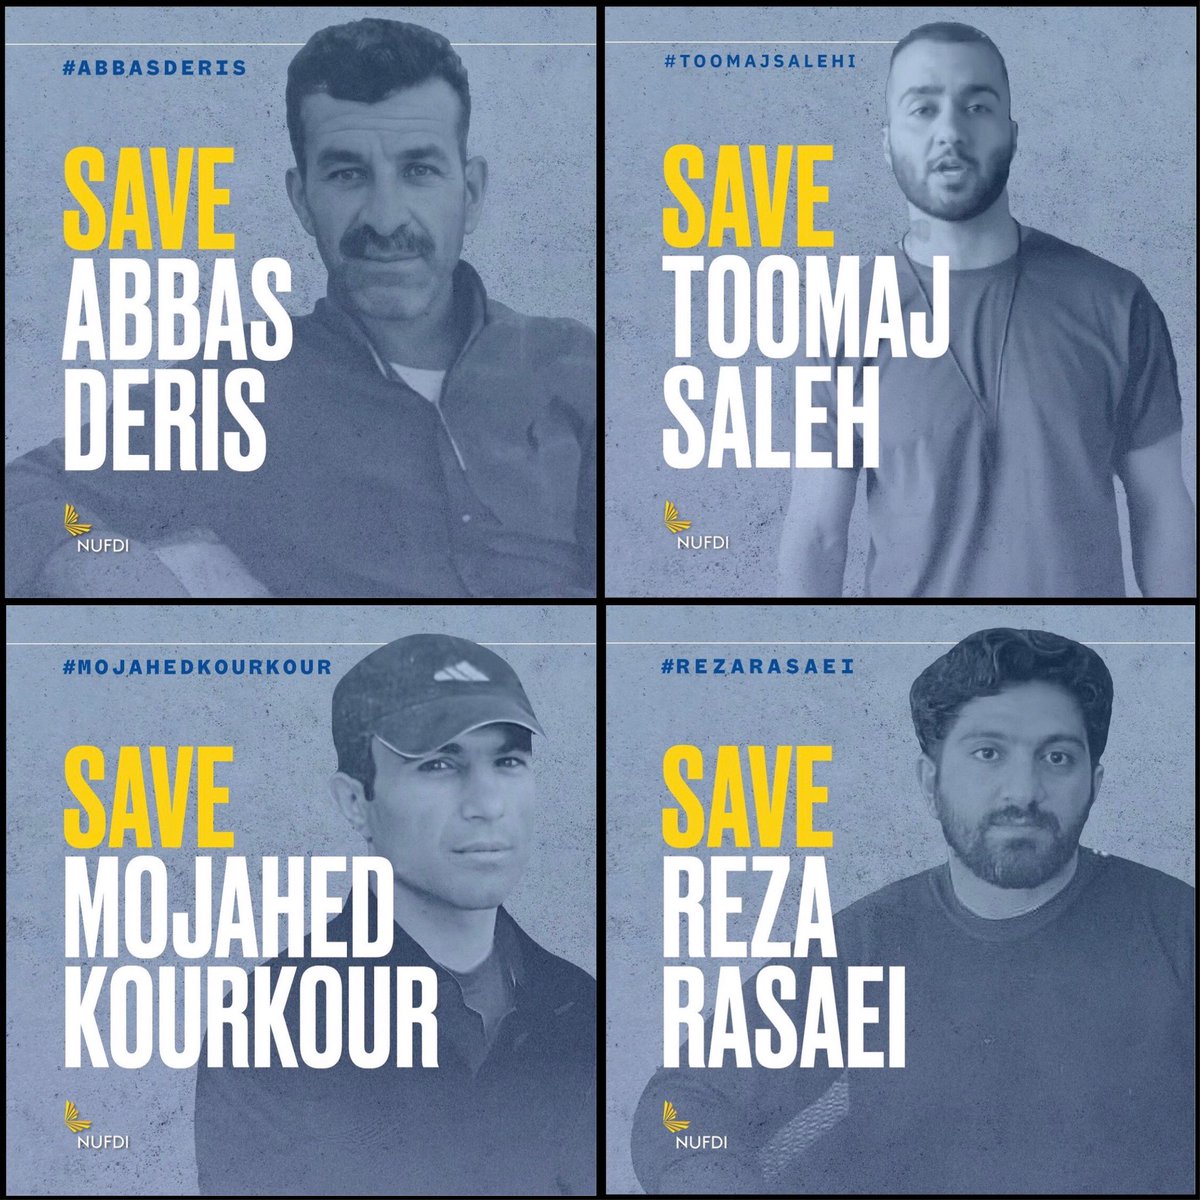 #ToomajSalehi #RezaRasaei #MojahedKourkour #AbbasDeris lives are at imminent danger of execution by the Islamic regime! 

Be their voice to save their lives!